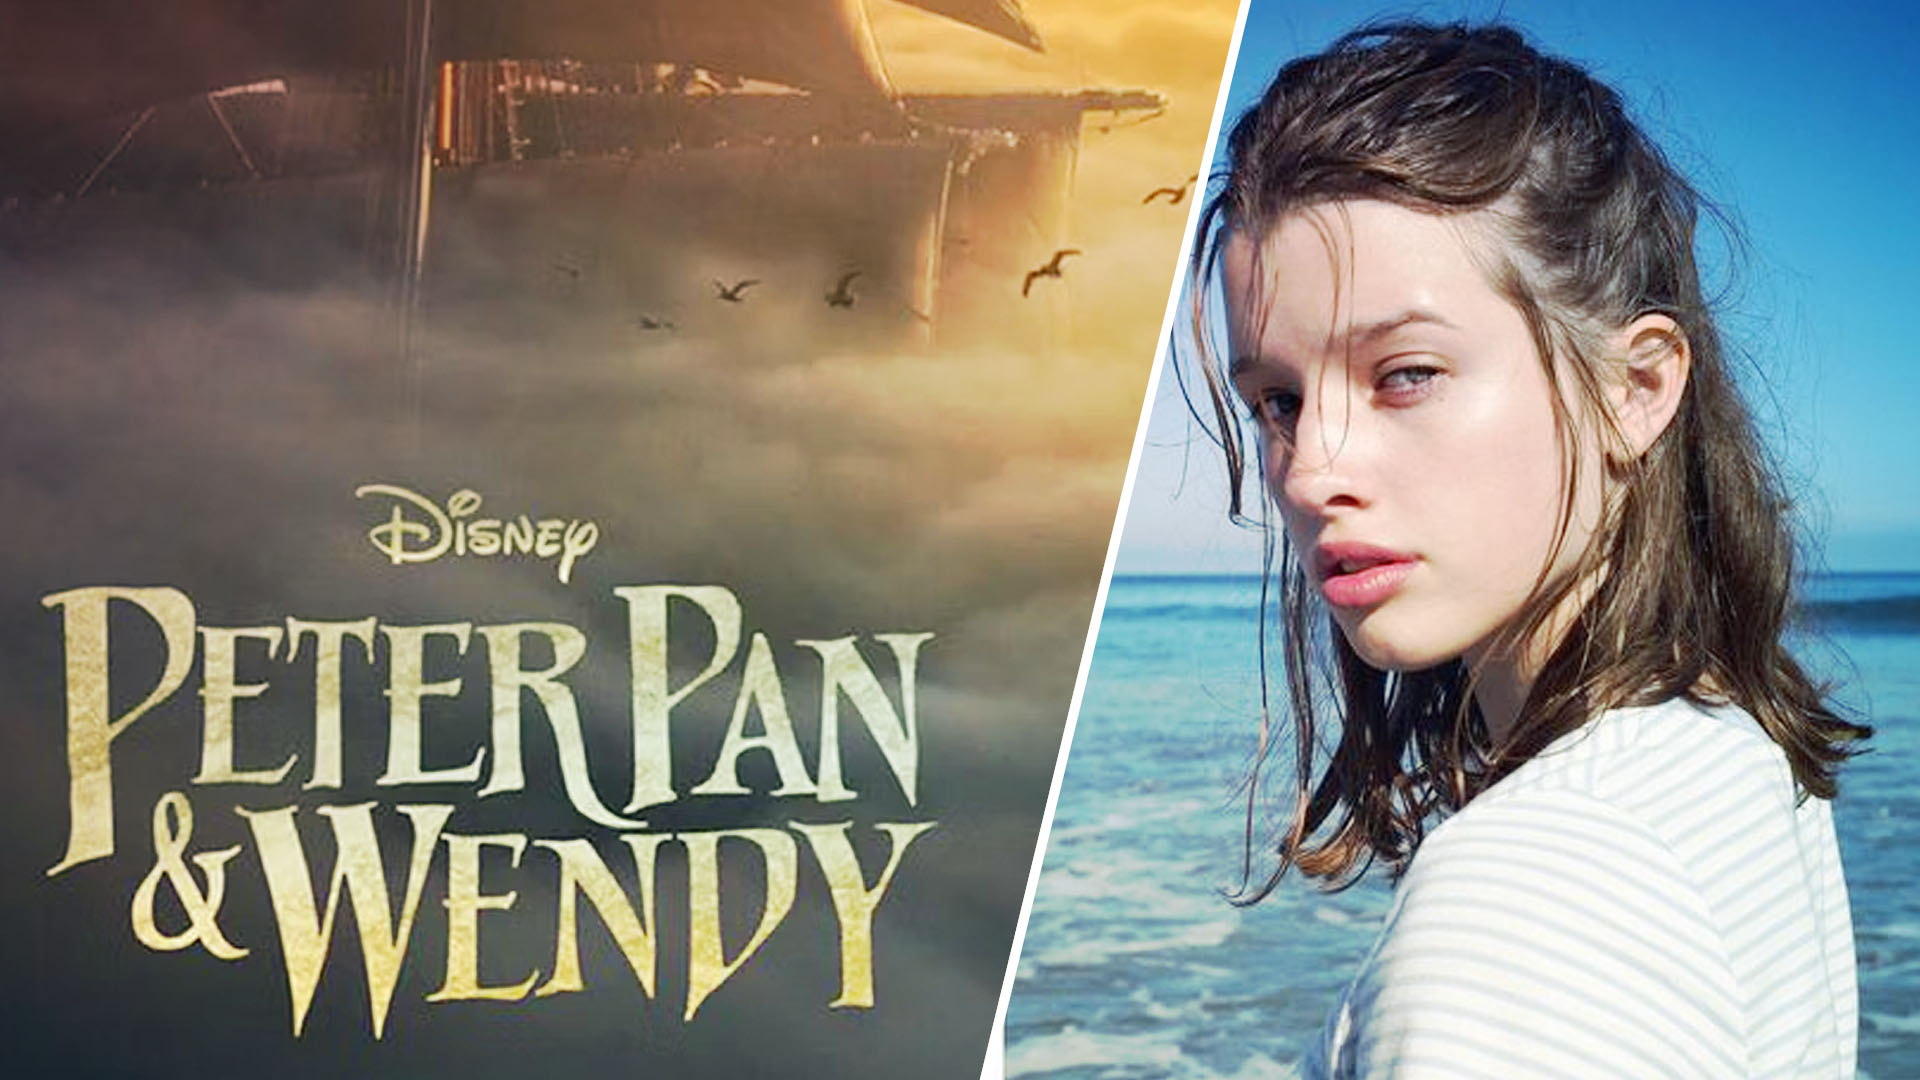 Peter Pan & Wendy Release Date, Cast Daily Research Plot